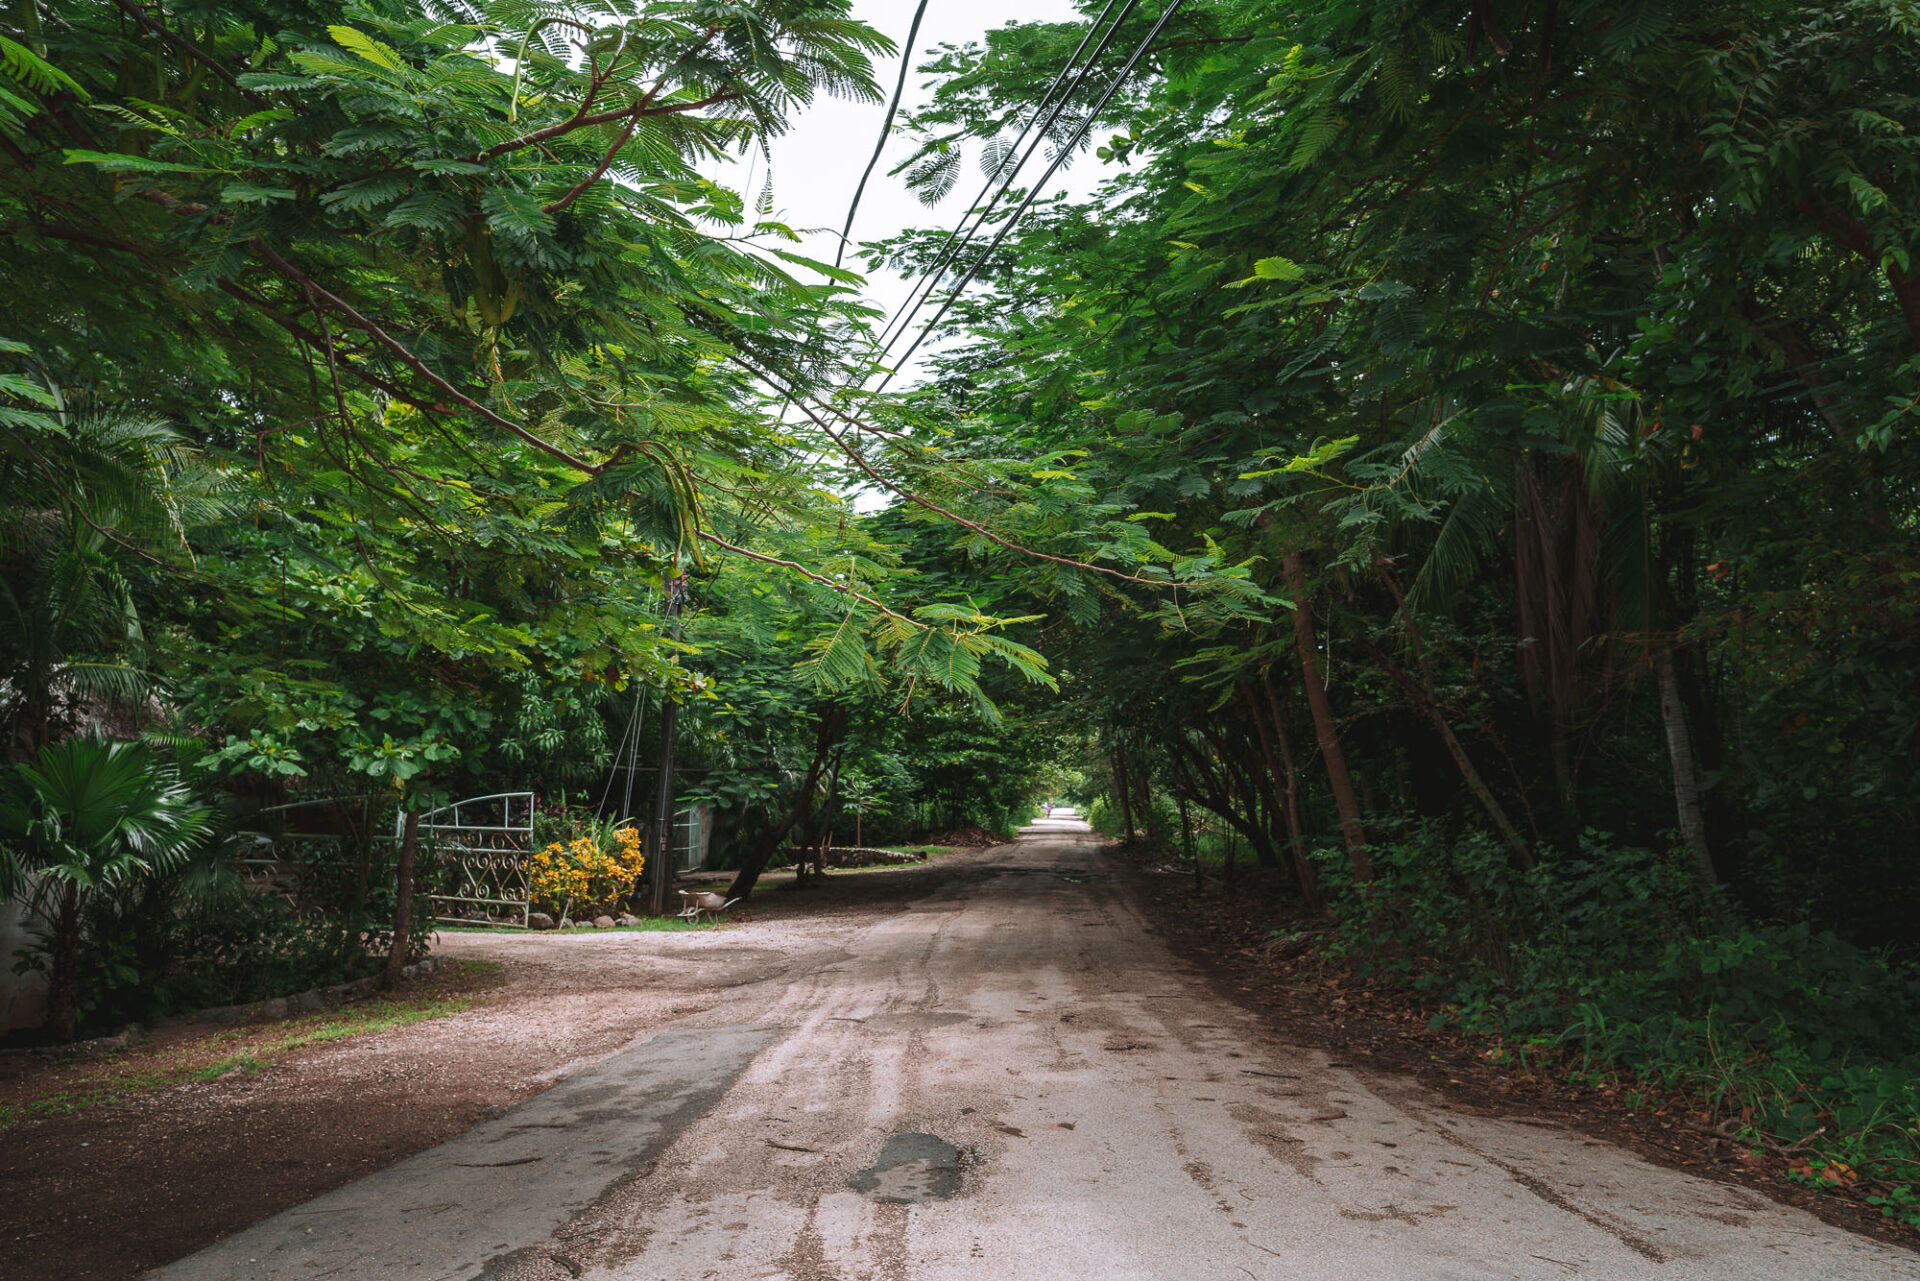 Driving on a dirt road in Costa Rica